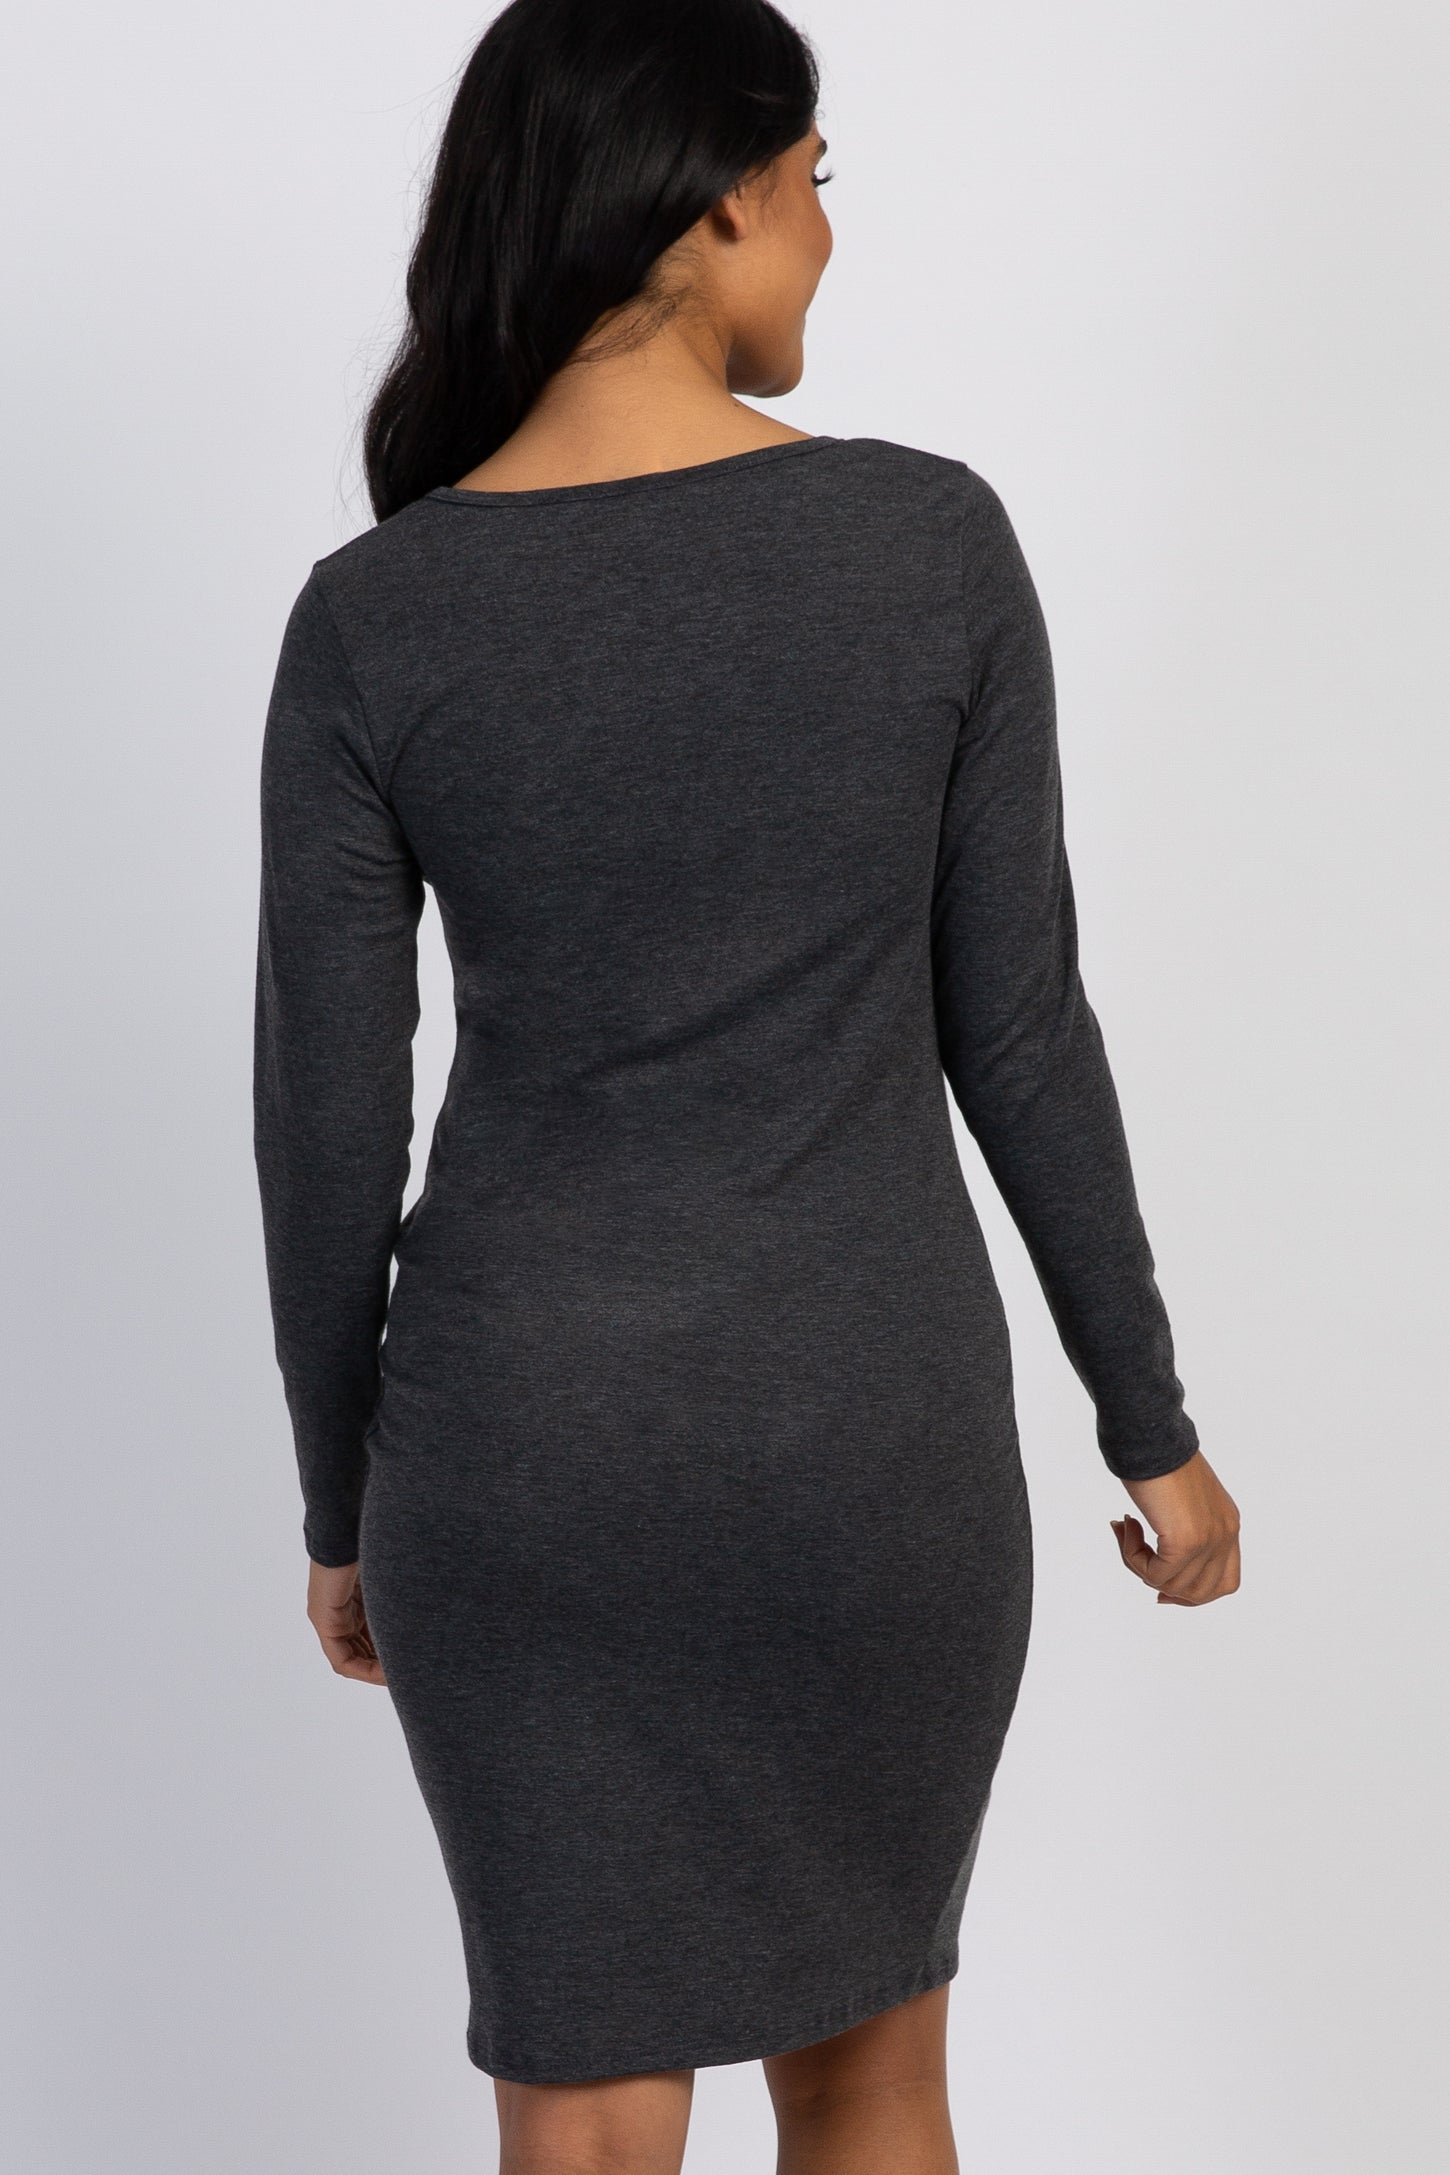 PinkBlush Charcoal Solid Fitted Long Sleeve Maternity Dress